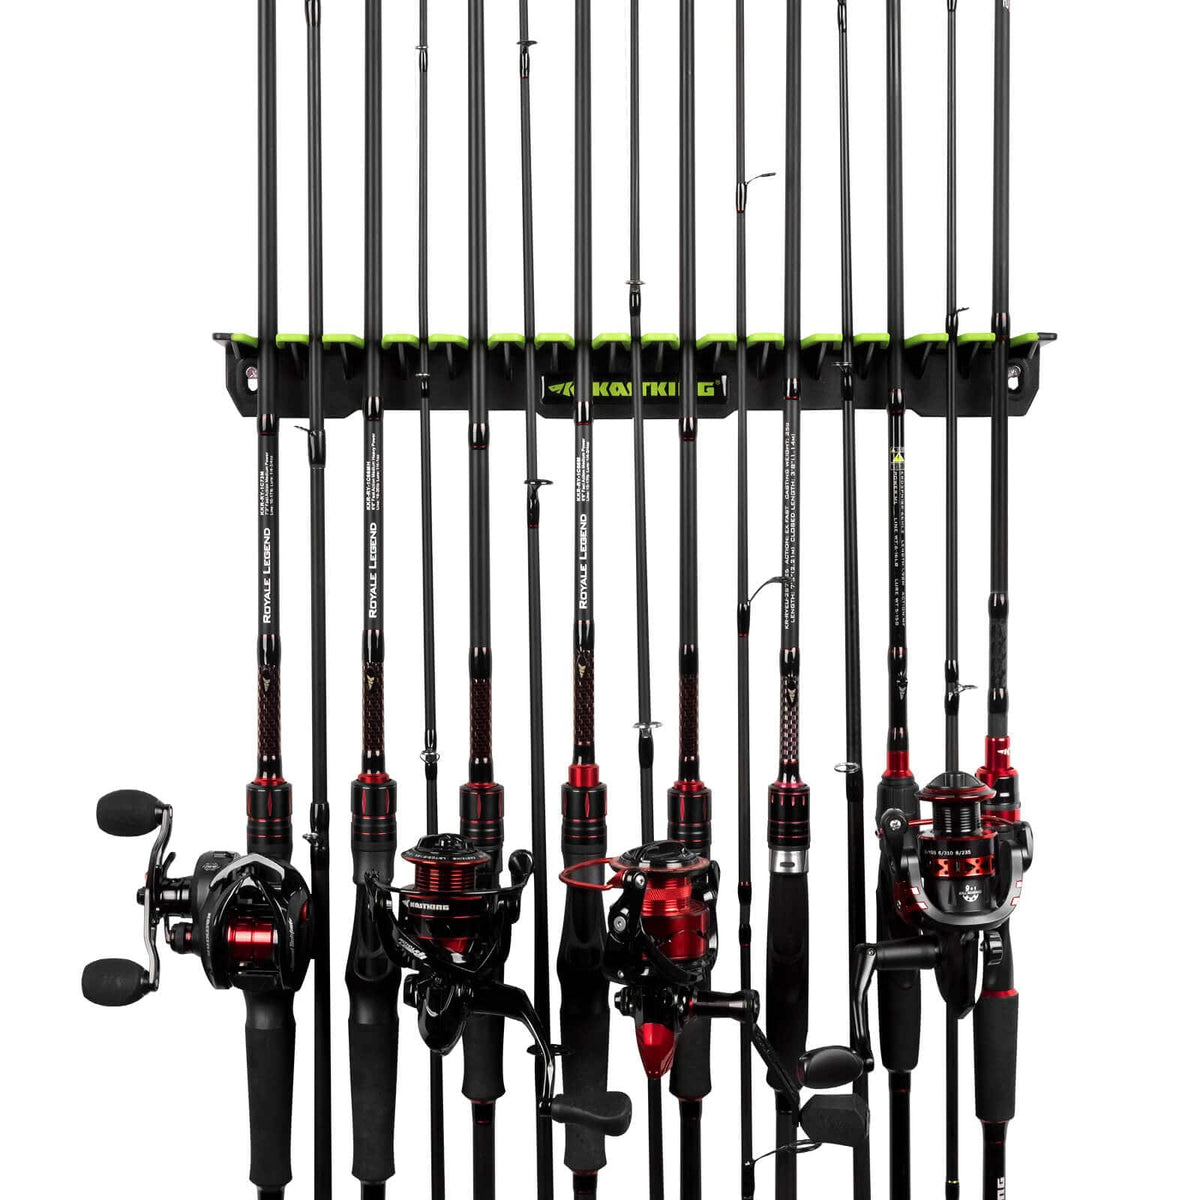  KastKing SafeGuard Fishing Rod Holder for Garage, Wall or  Ceiling Mounted Fishing Rod Rack Storage Organizer, Fishing Pole Holder  Holds 12 Rods or Combos in Less Than 36 Inches : Sports